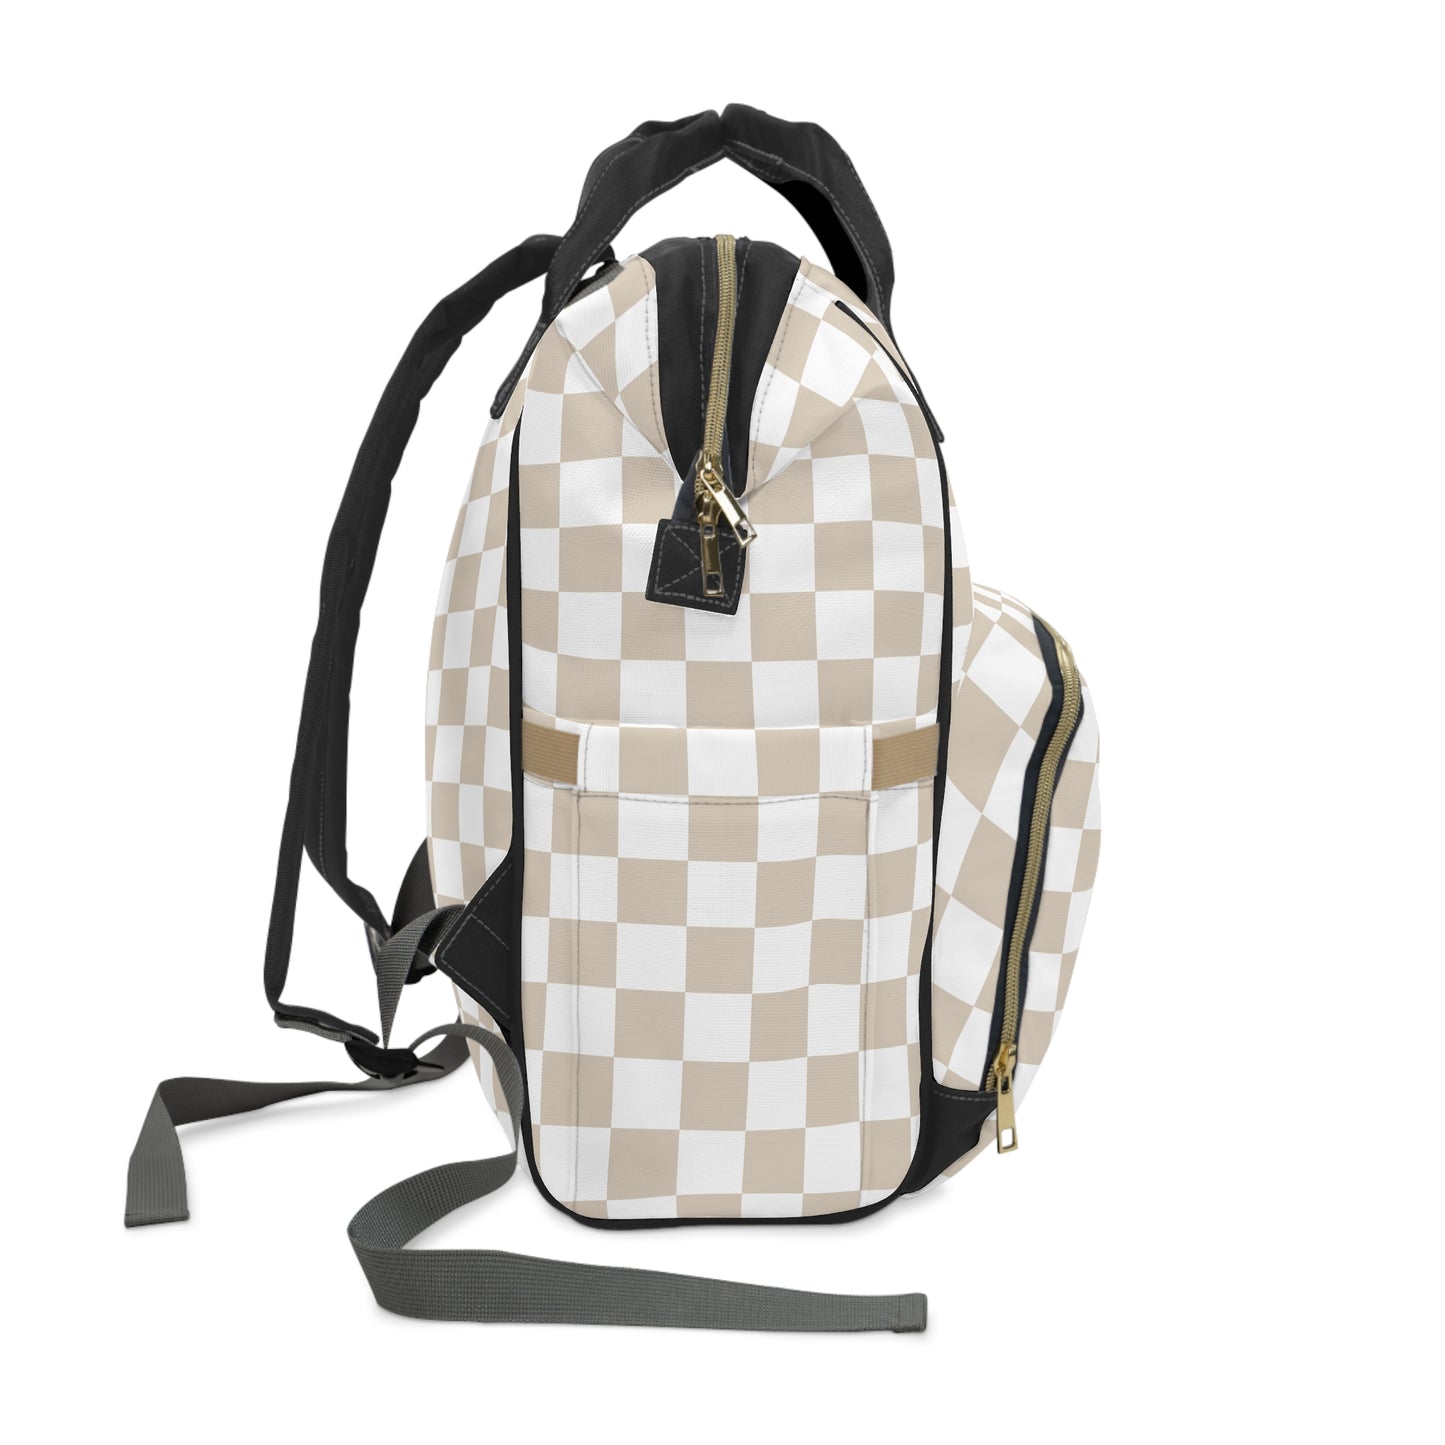 Neutral Checkered Multifunctional Diaper Backpack